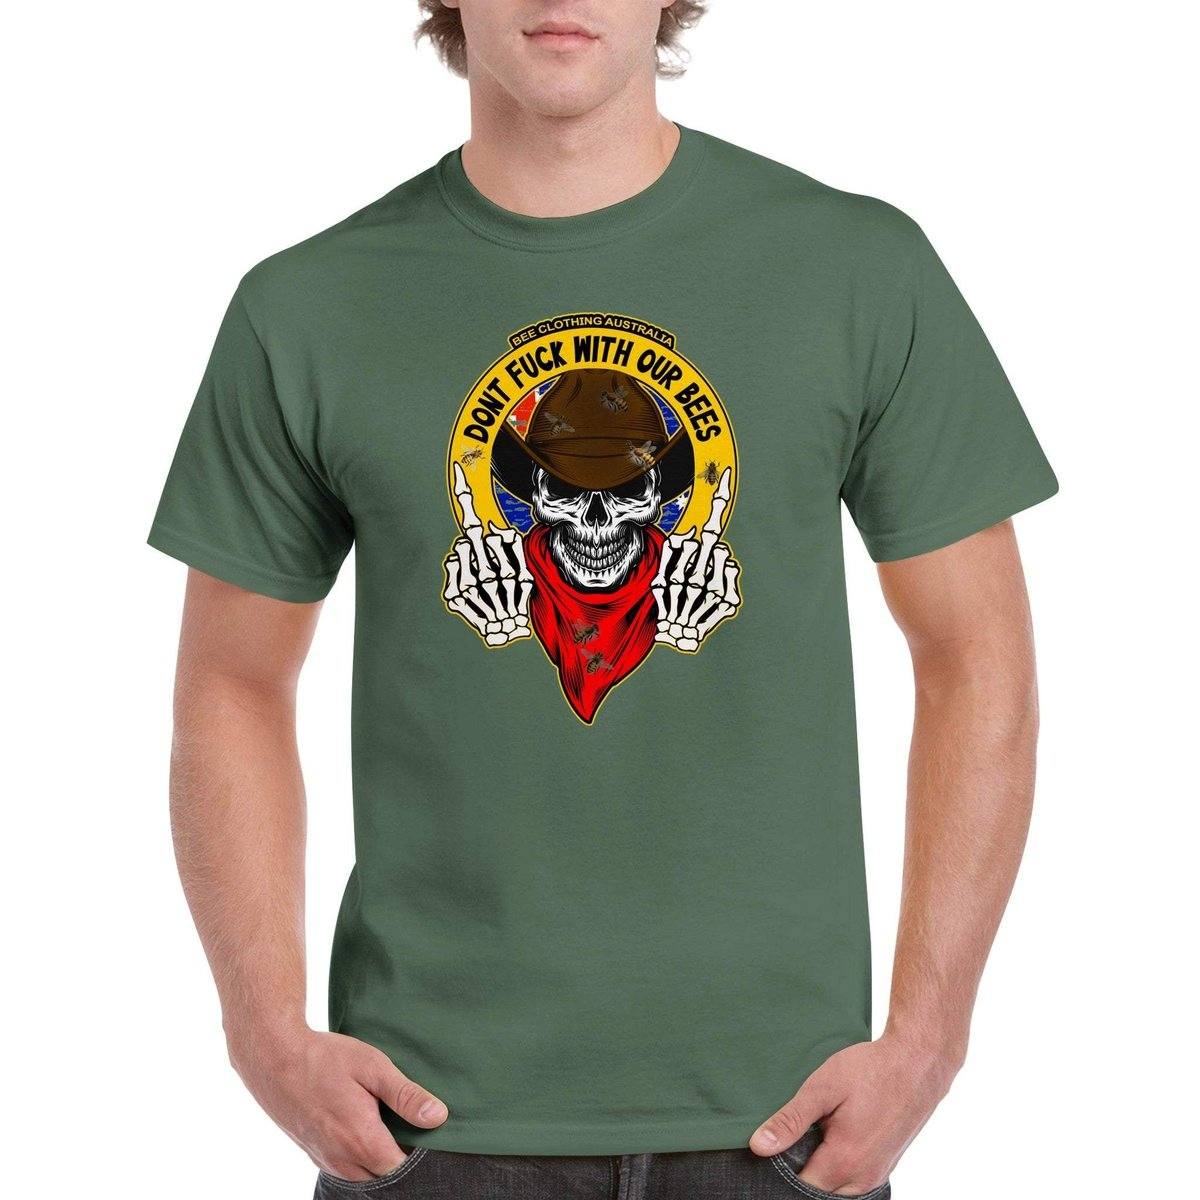 Dont Fuck With Our Bees T-Shirt - beekeeper Tshirt - Unisex Crewneck T-shirt Australia Online Color Military Green / S